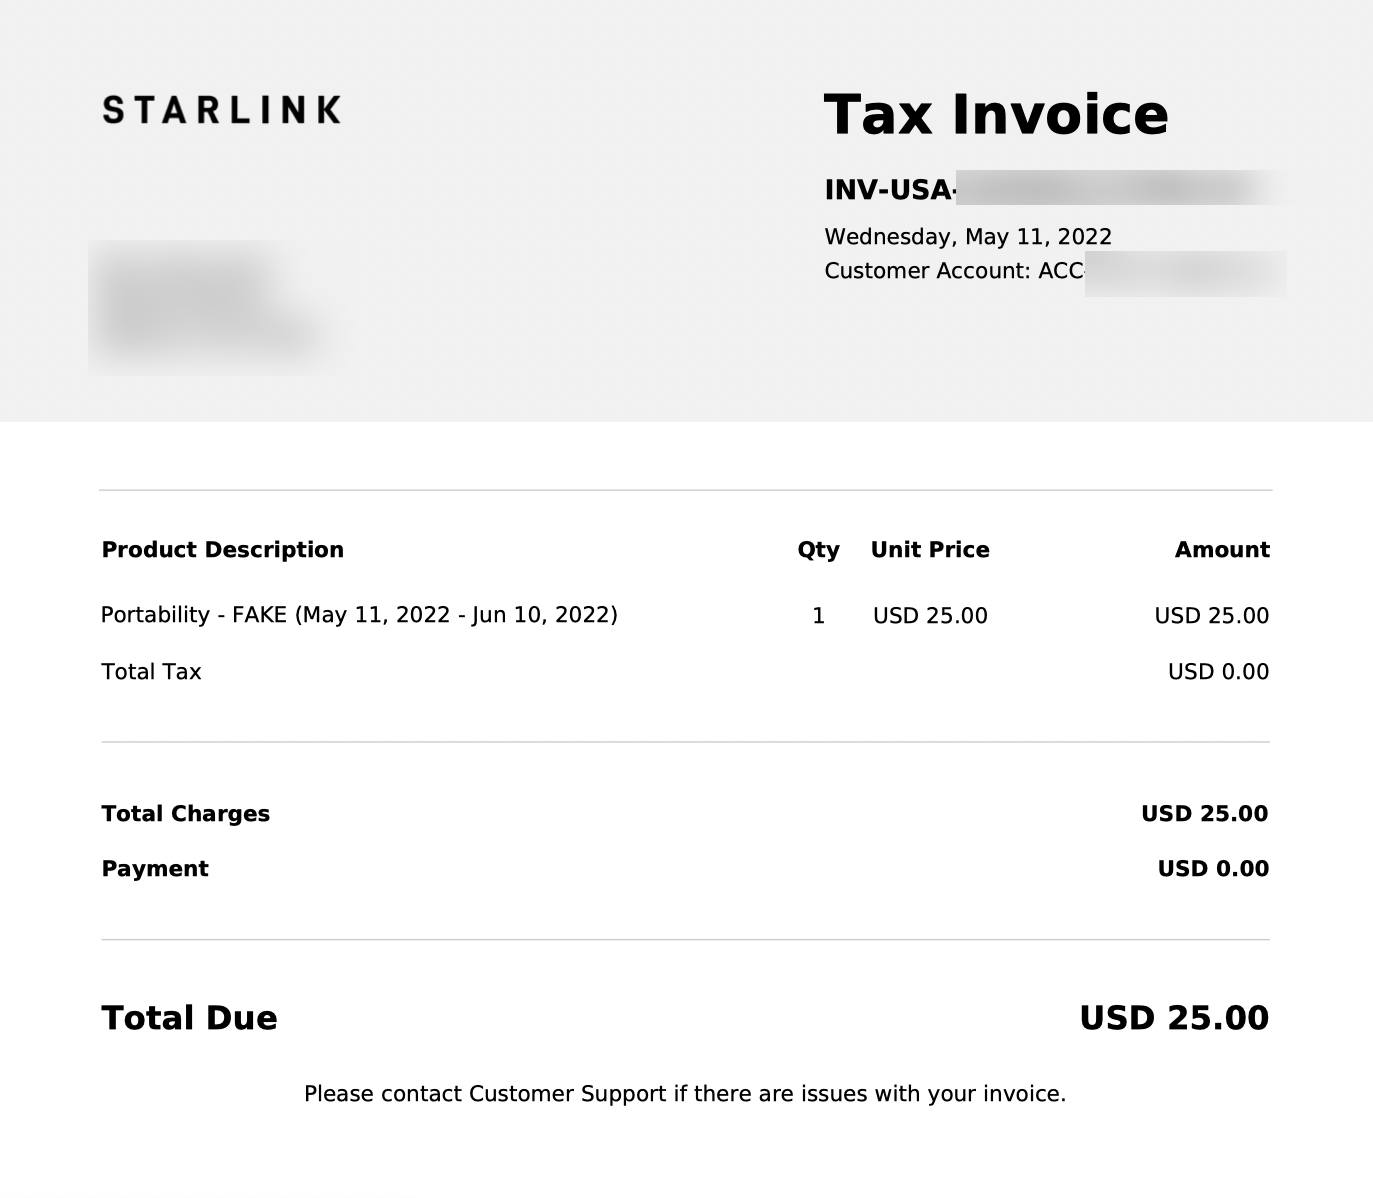 Starlink Service Portability charge 